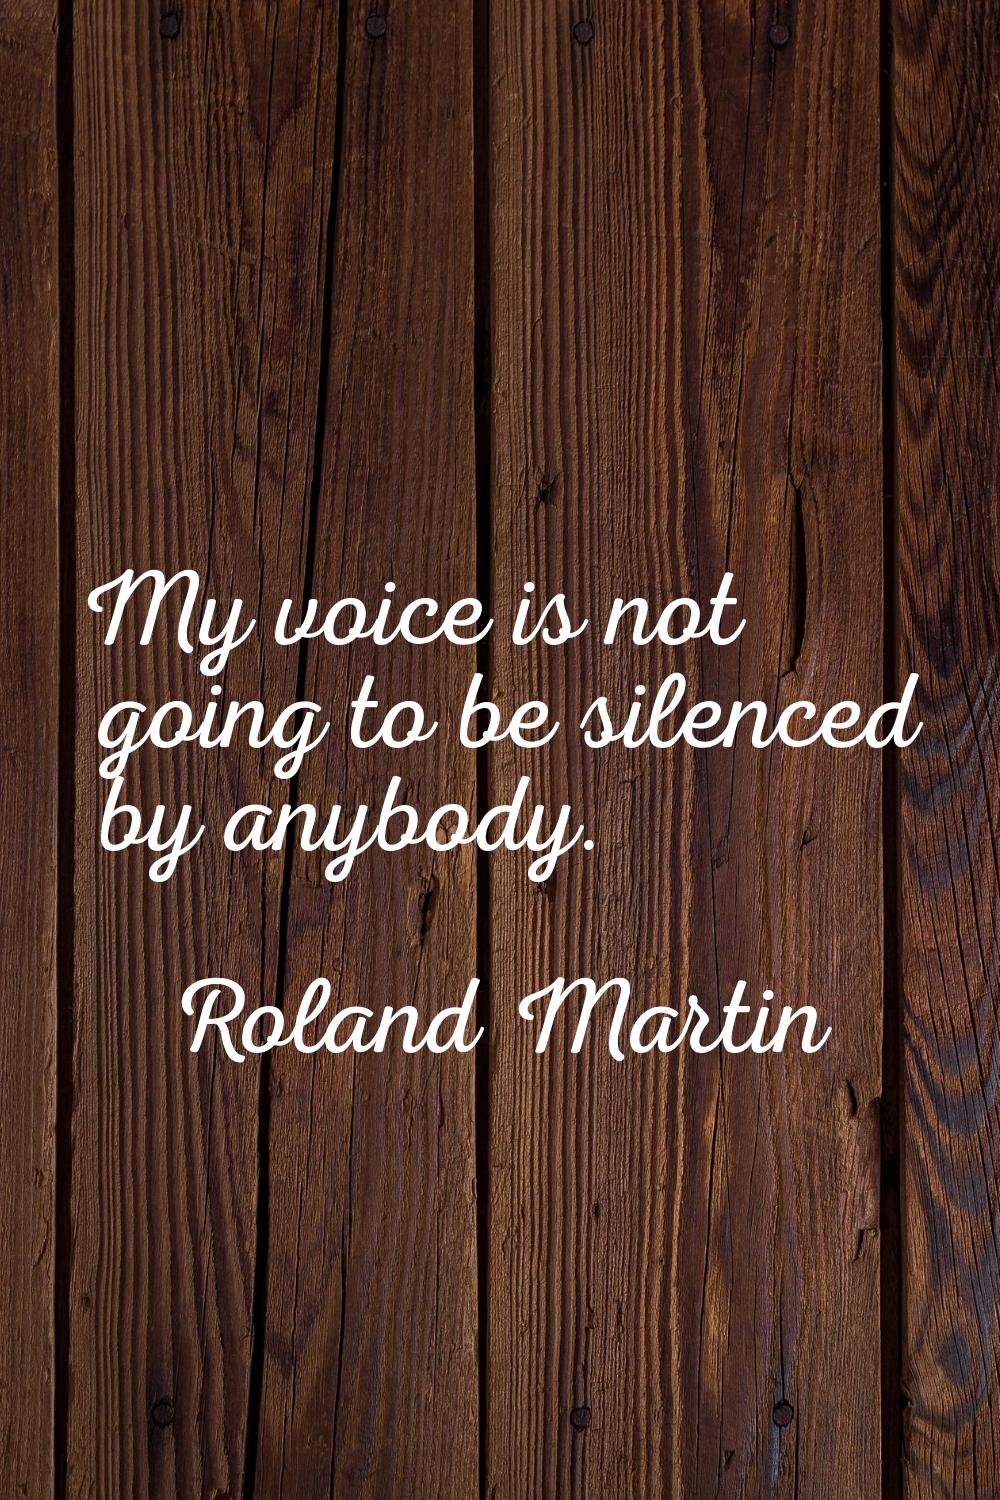 My voice is not going to be silenced by anybody.